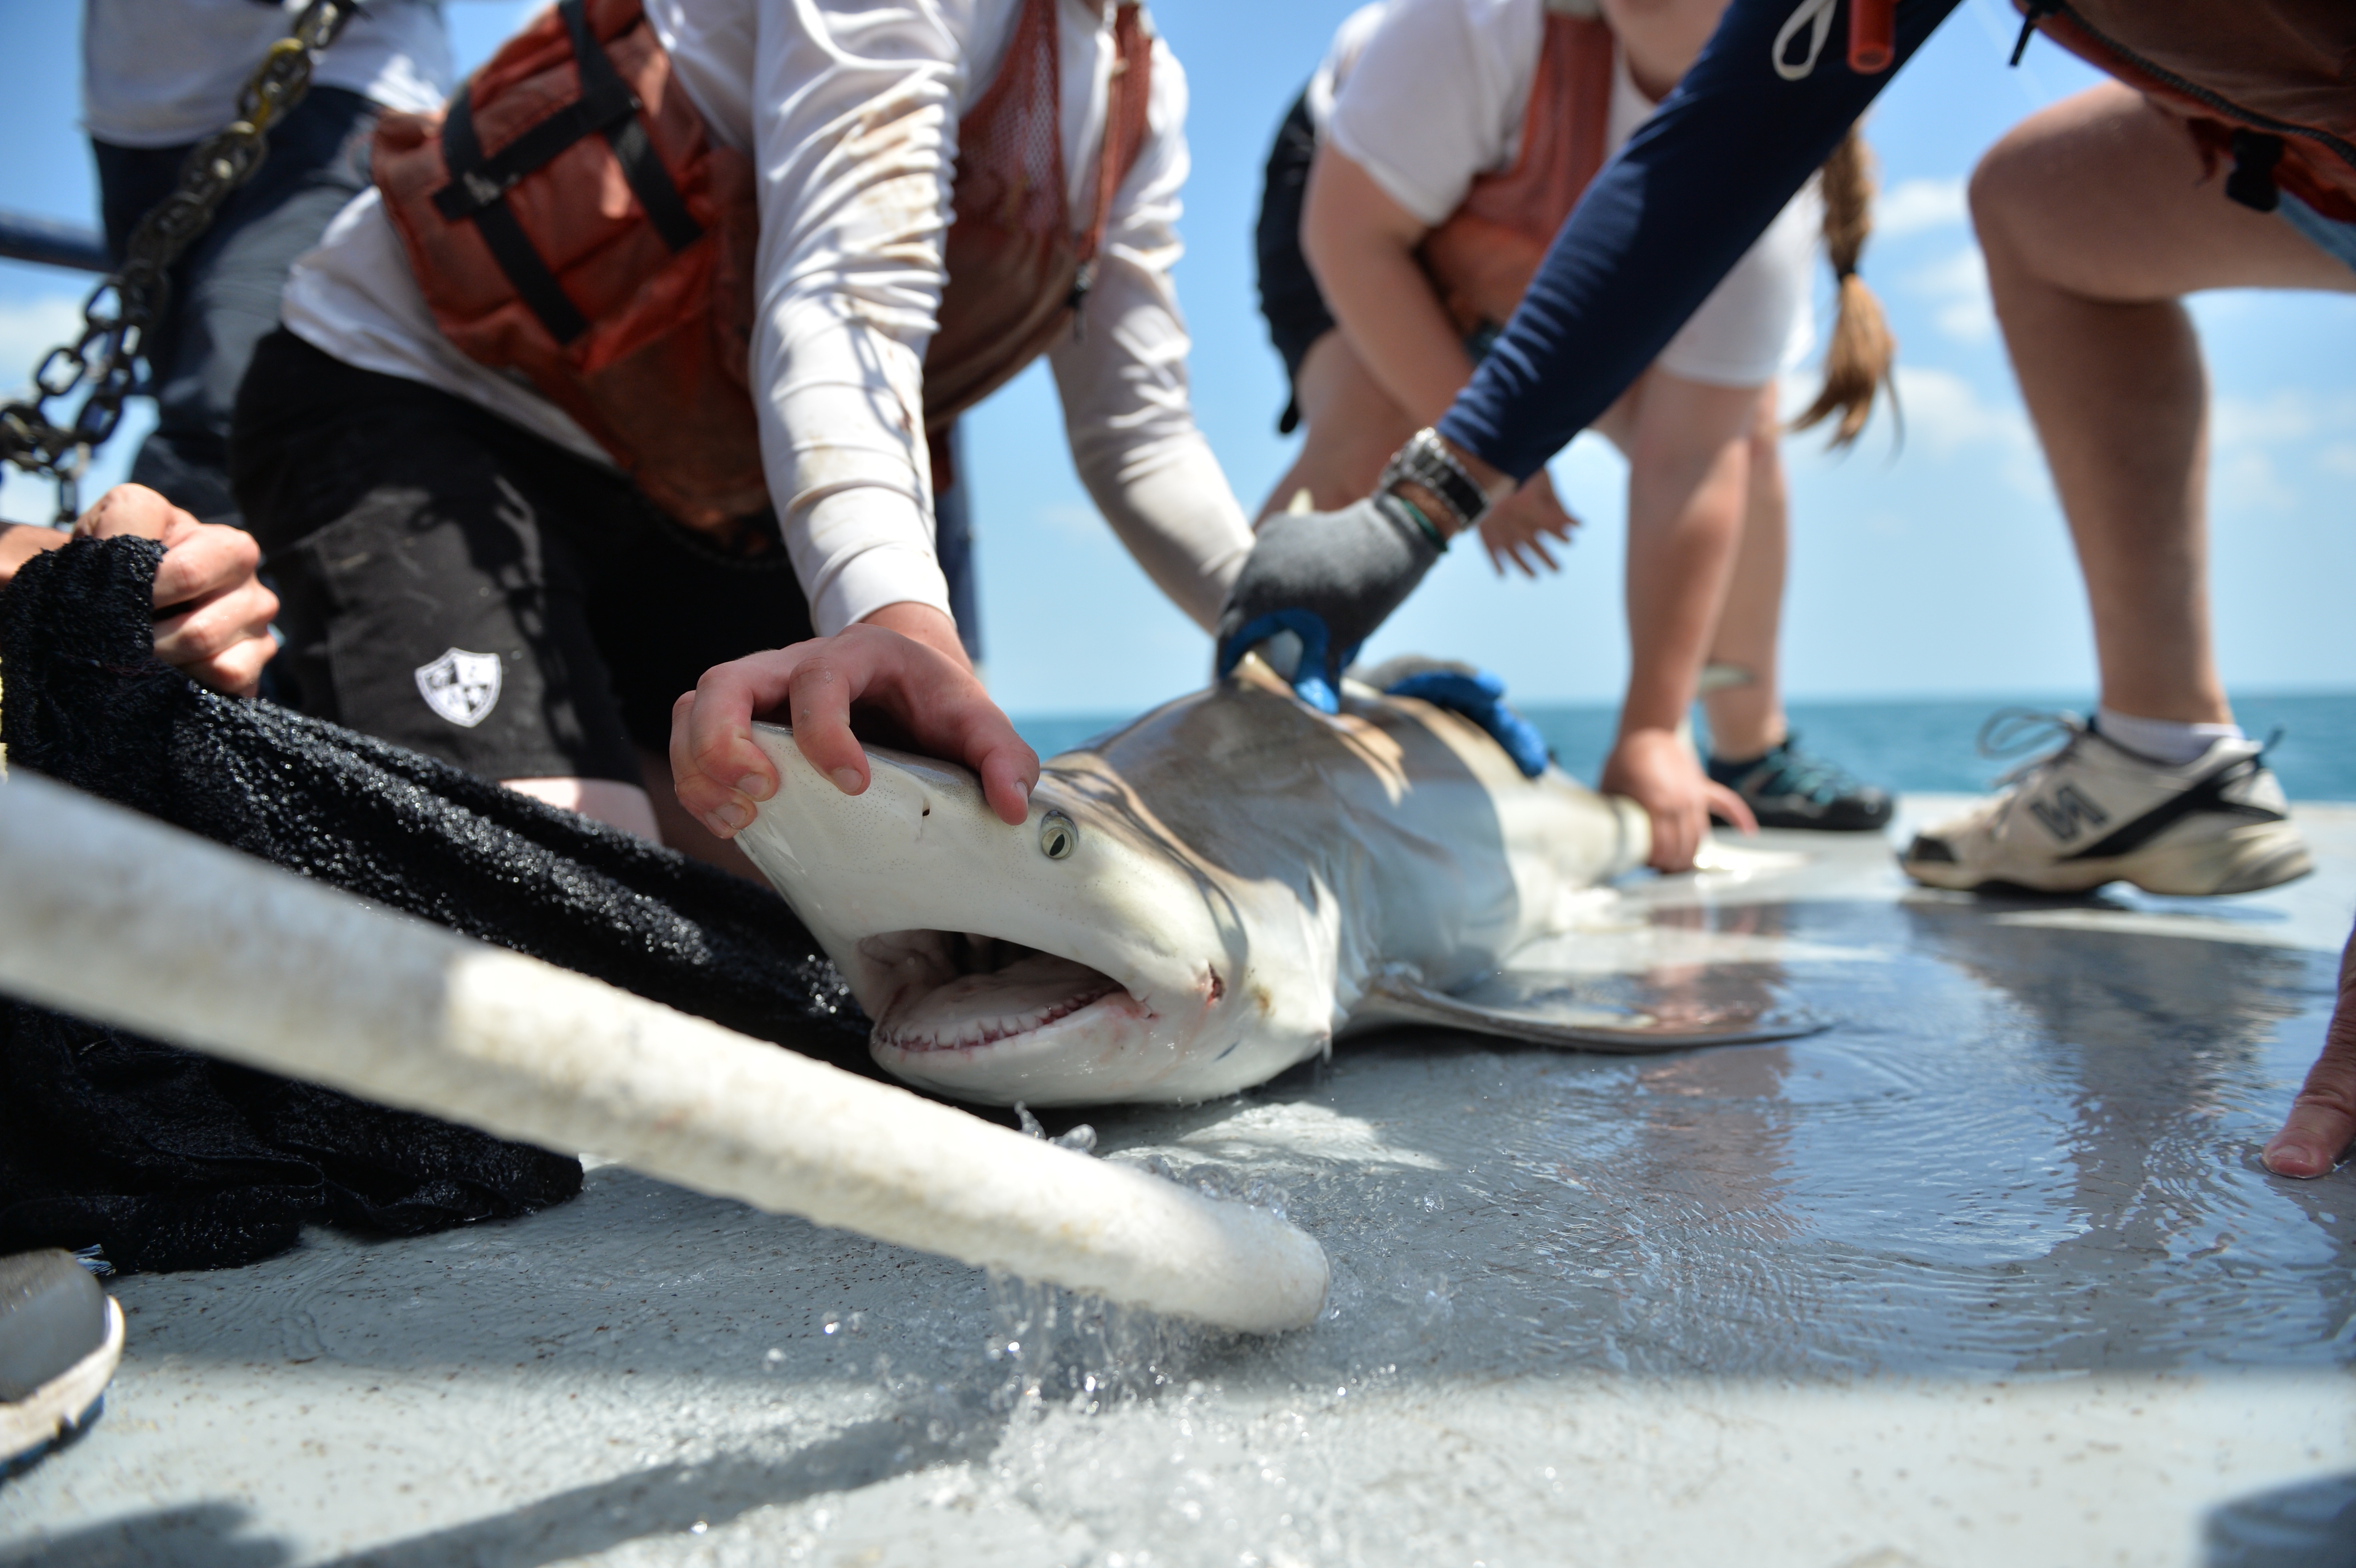 Satellite-Tagged Sharks Provide New Data on Gulf Migrations